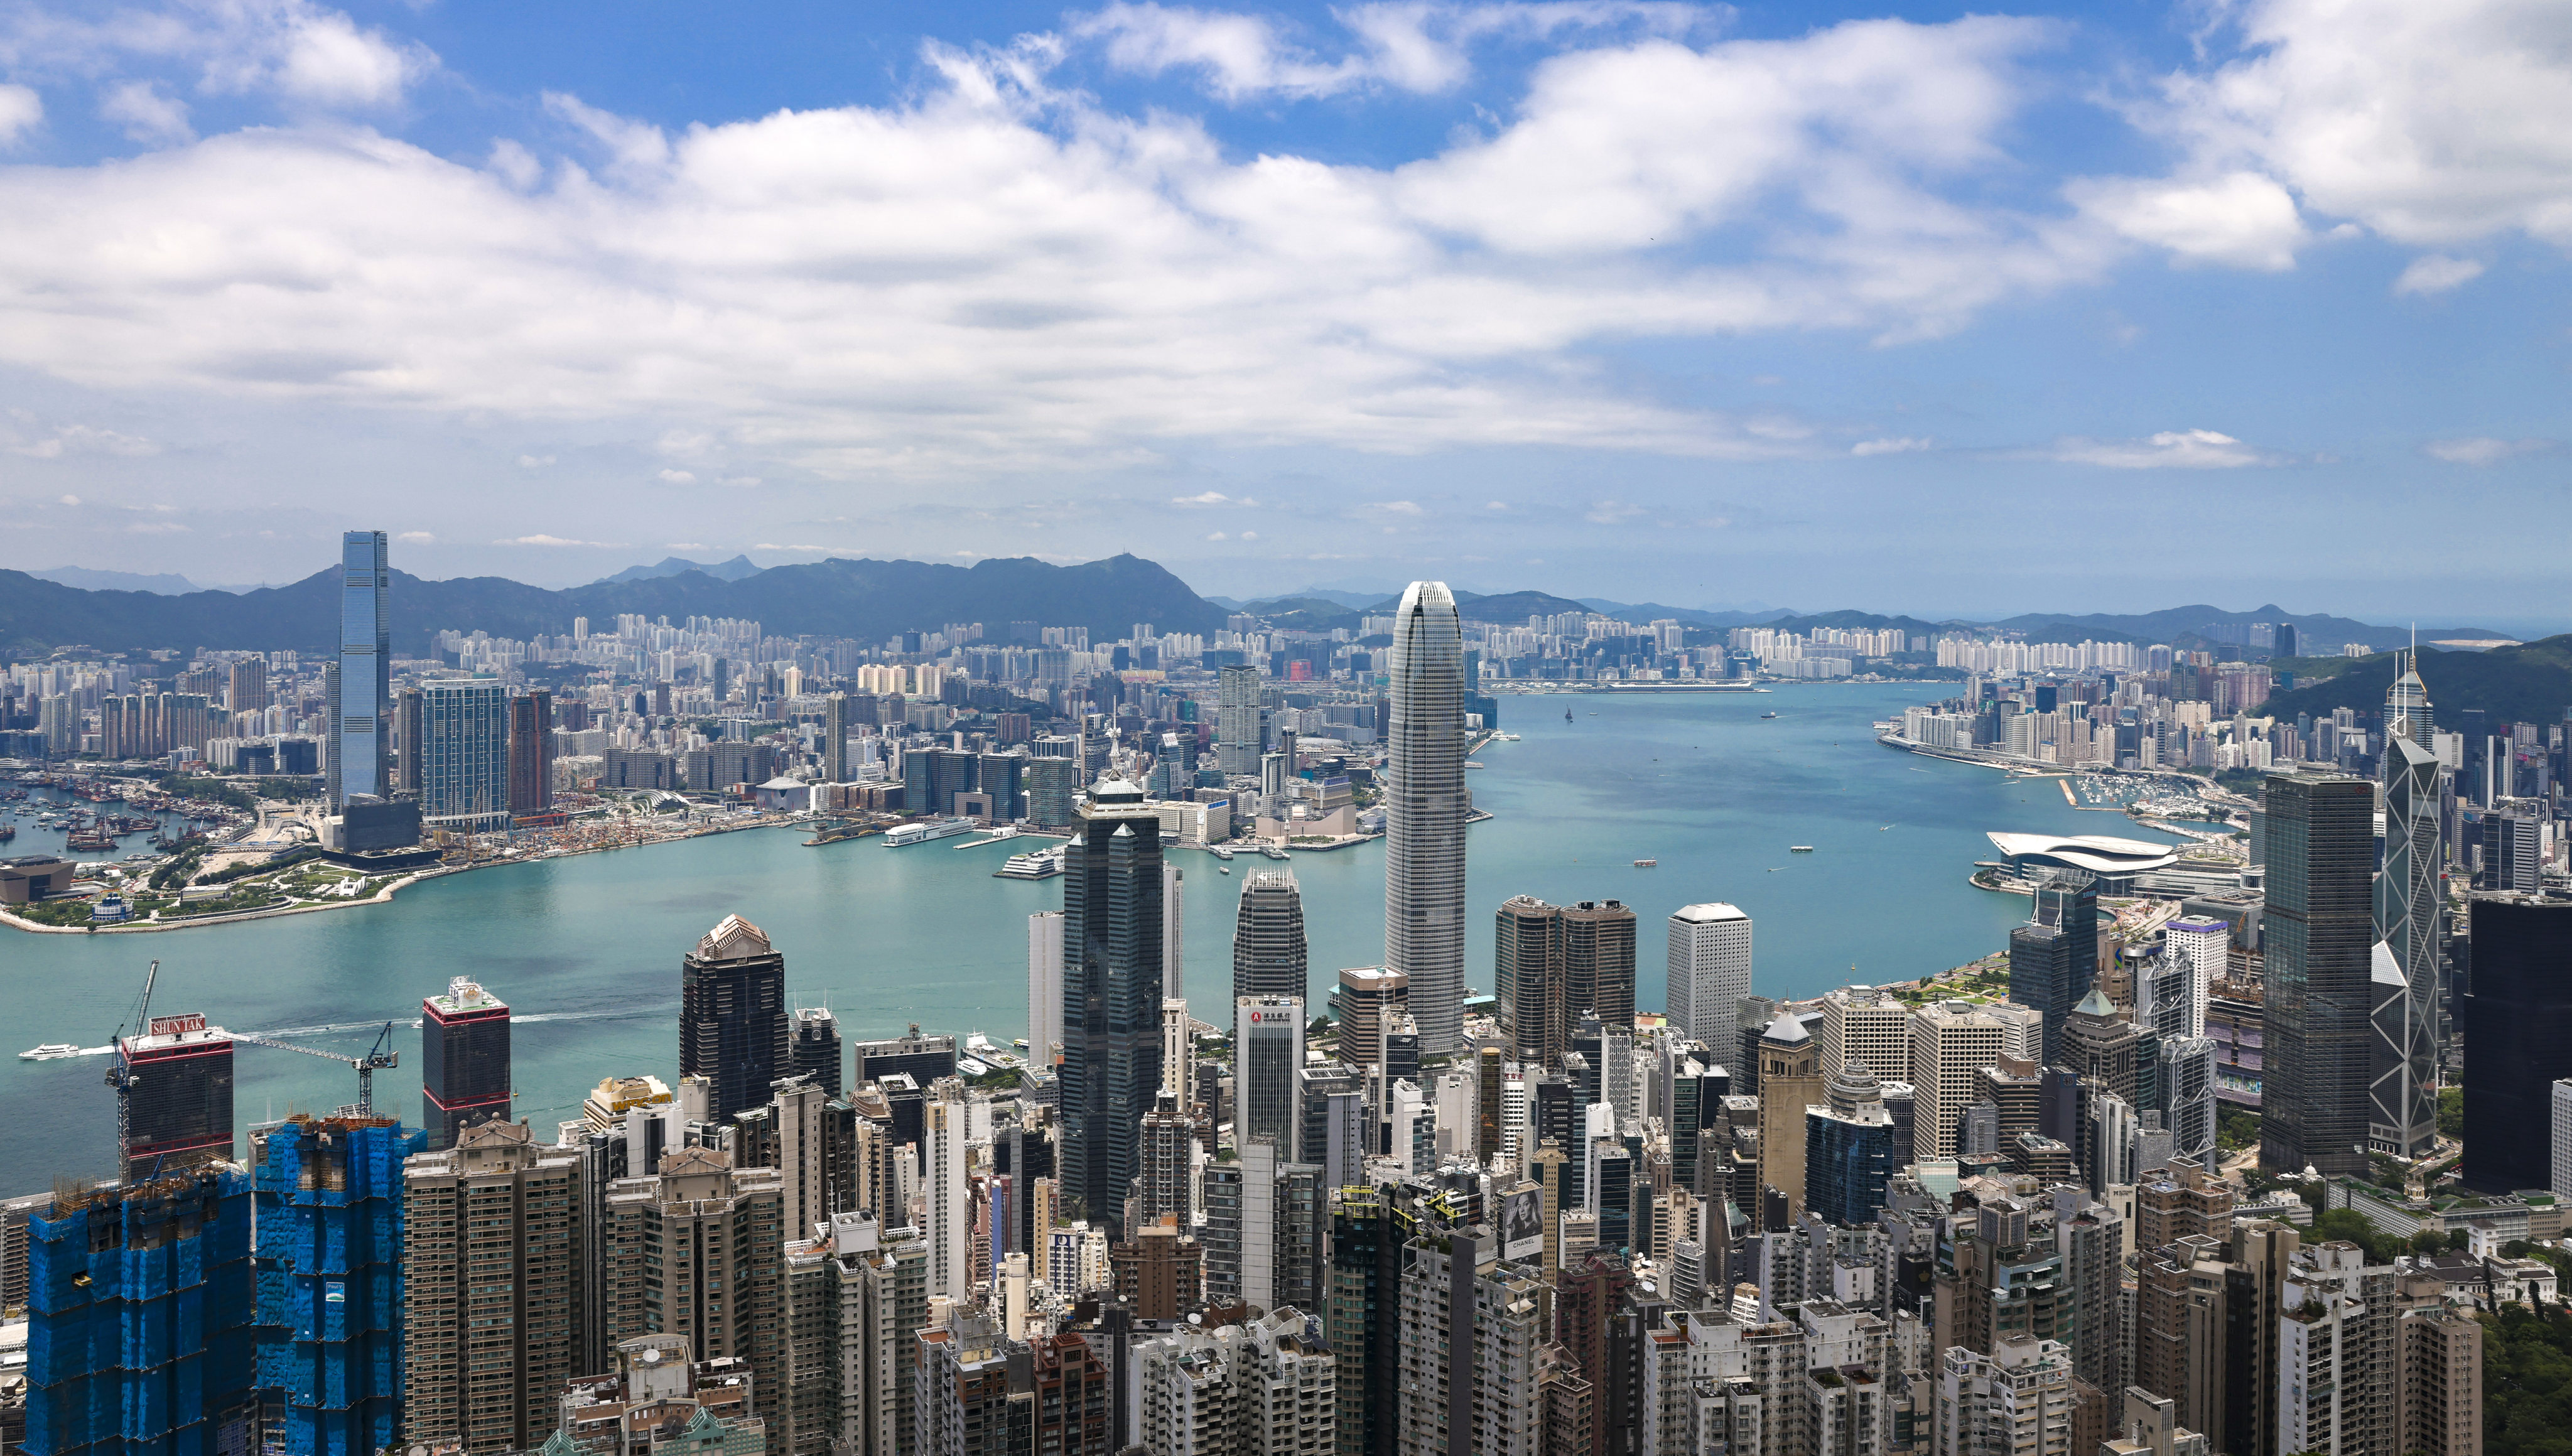 Hong Kong leader John Lee has set out his vision for the city in the coming decades. Photo: K. Y. Cheng